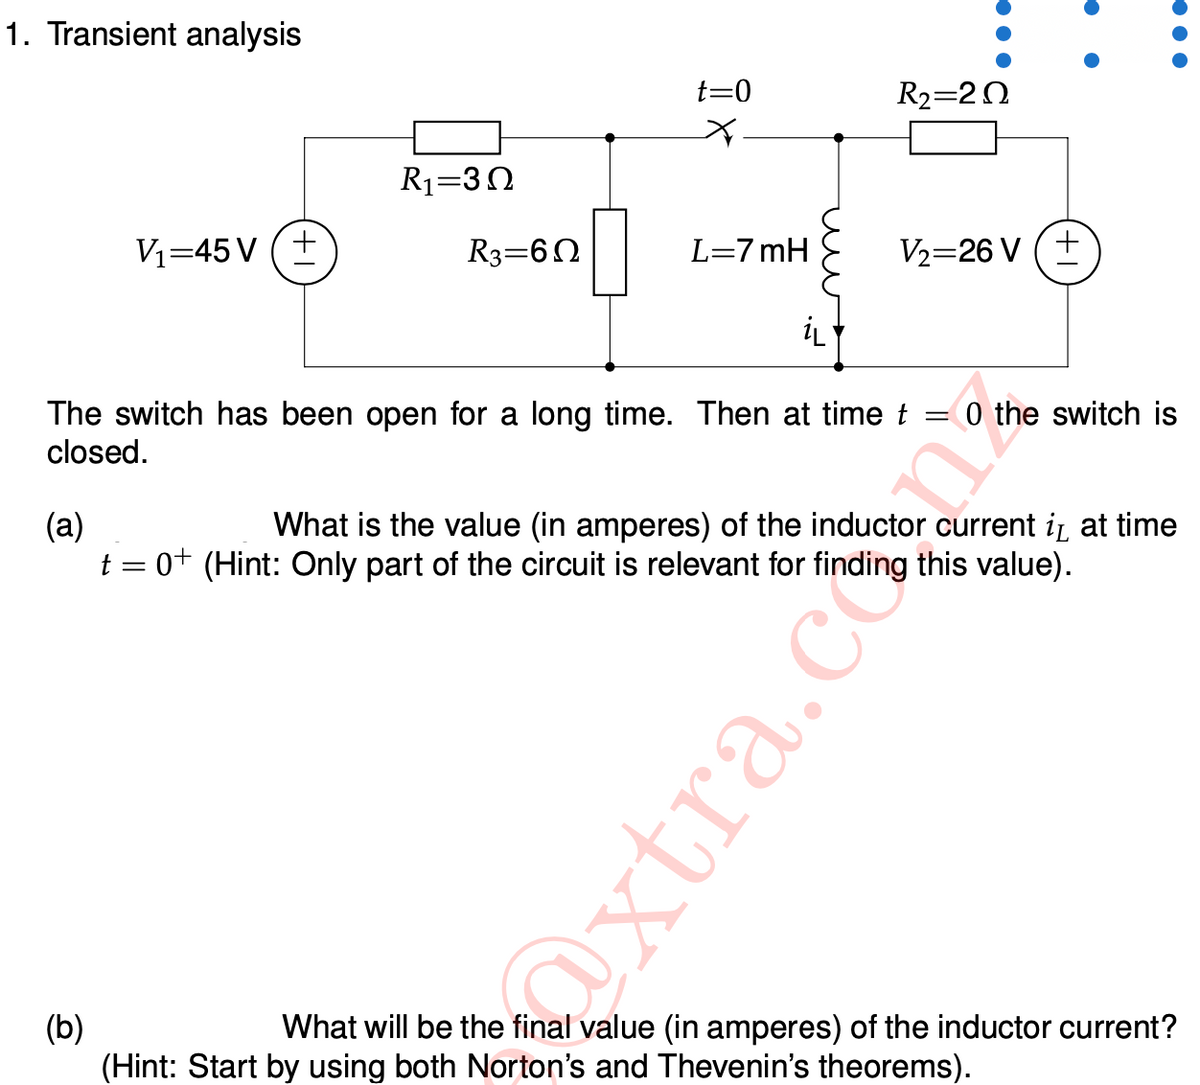 1. Transient analysis
t=0
R2=20
R1=30
V1=45 V (+
R3=60
L=7 mH
V2=26 V (+
iL
0 the switch is
The switch has been open for a long time. Then at time t
closed.
||
(a)
t = 0+ (Hint: Only part of the circuit is relevant for finding this value).
What is the value (in amperes) of the inductor current iz at time
(b)
(Hint: Start by using both Norton's and Thevenin's theorems).
What will be the final value (in amperes) of the inductor current?
Oxtra.c
